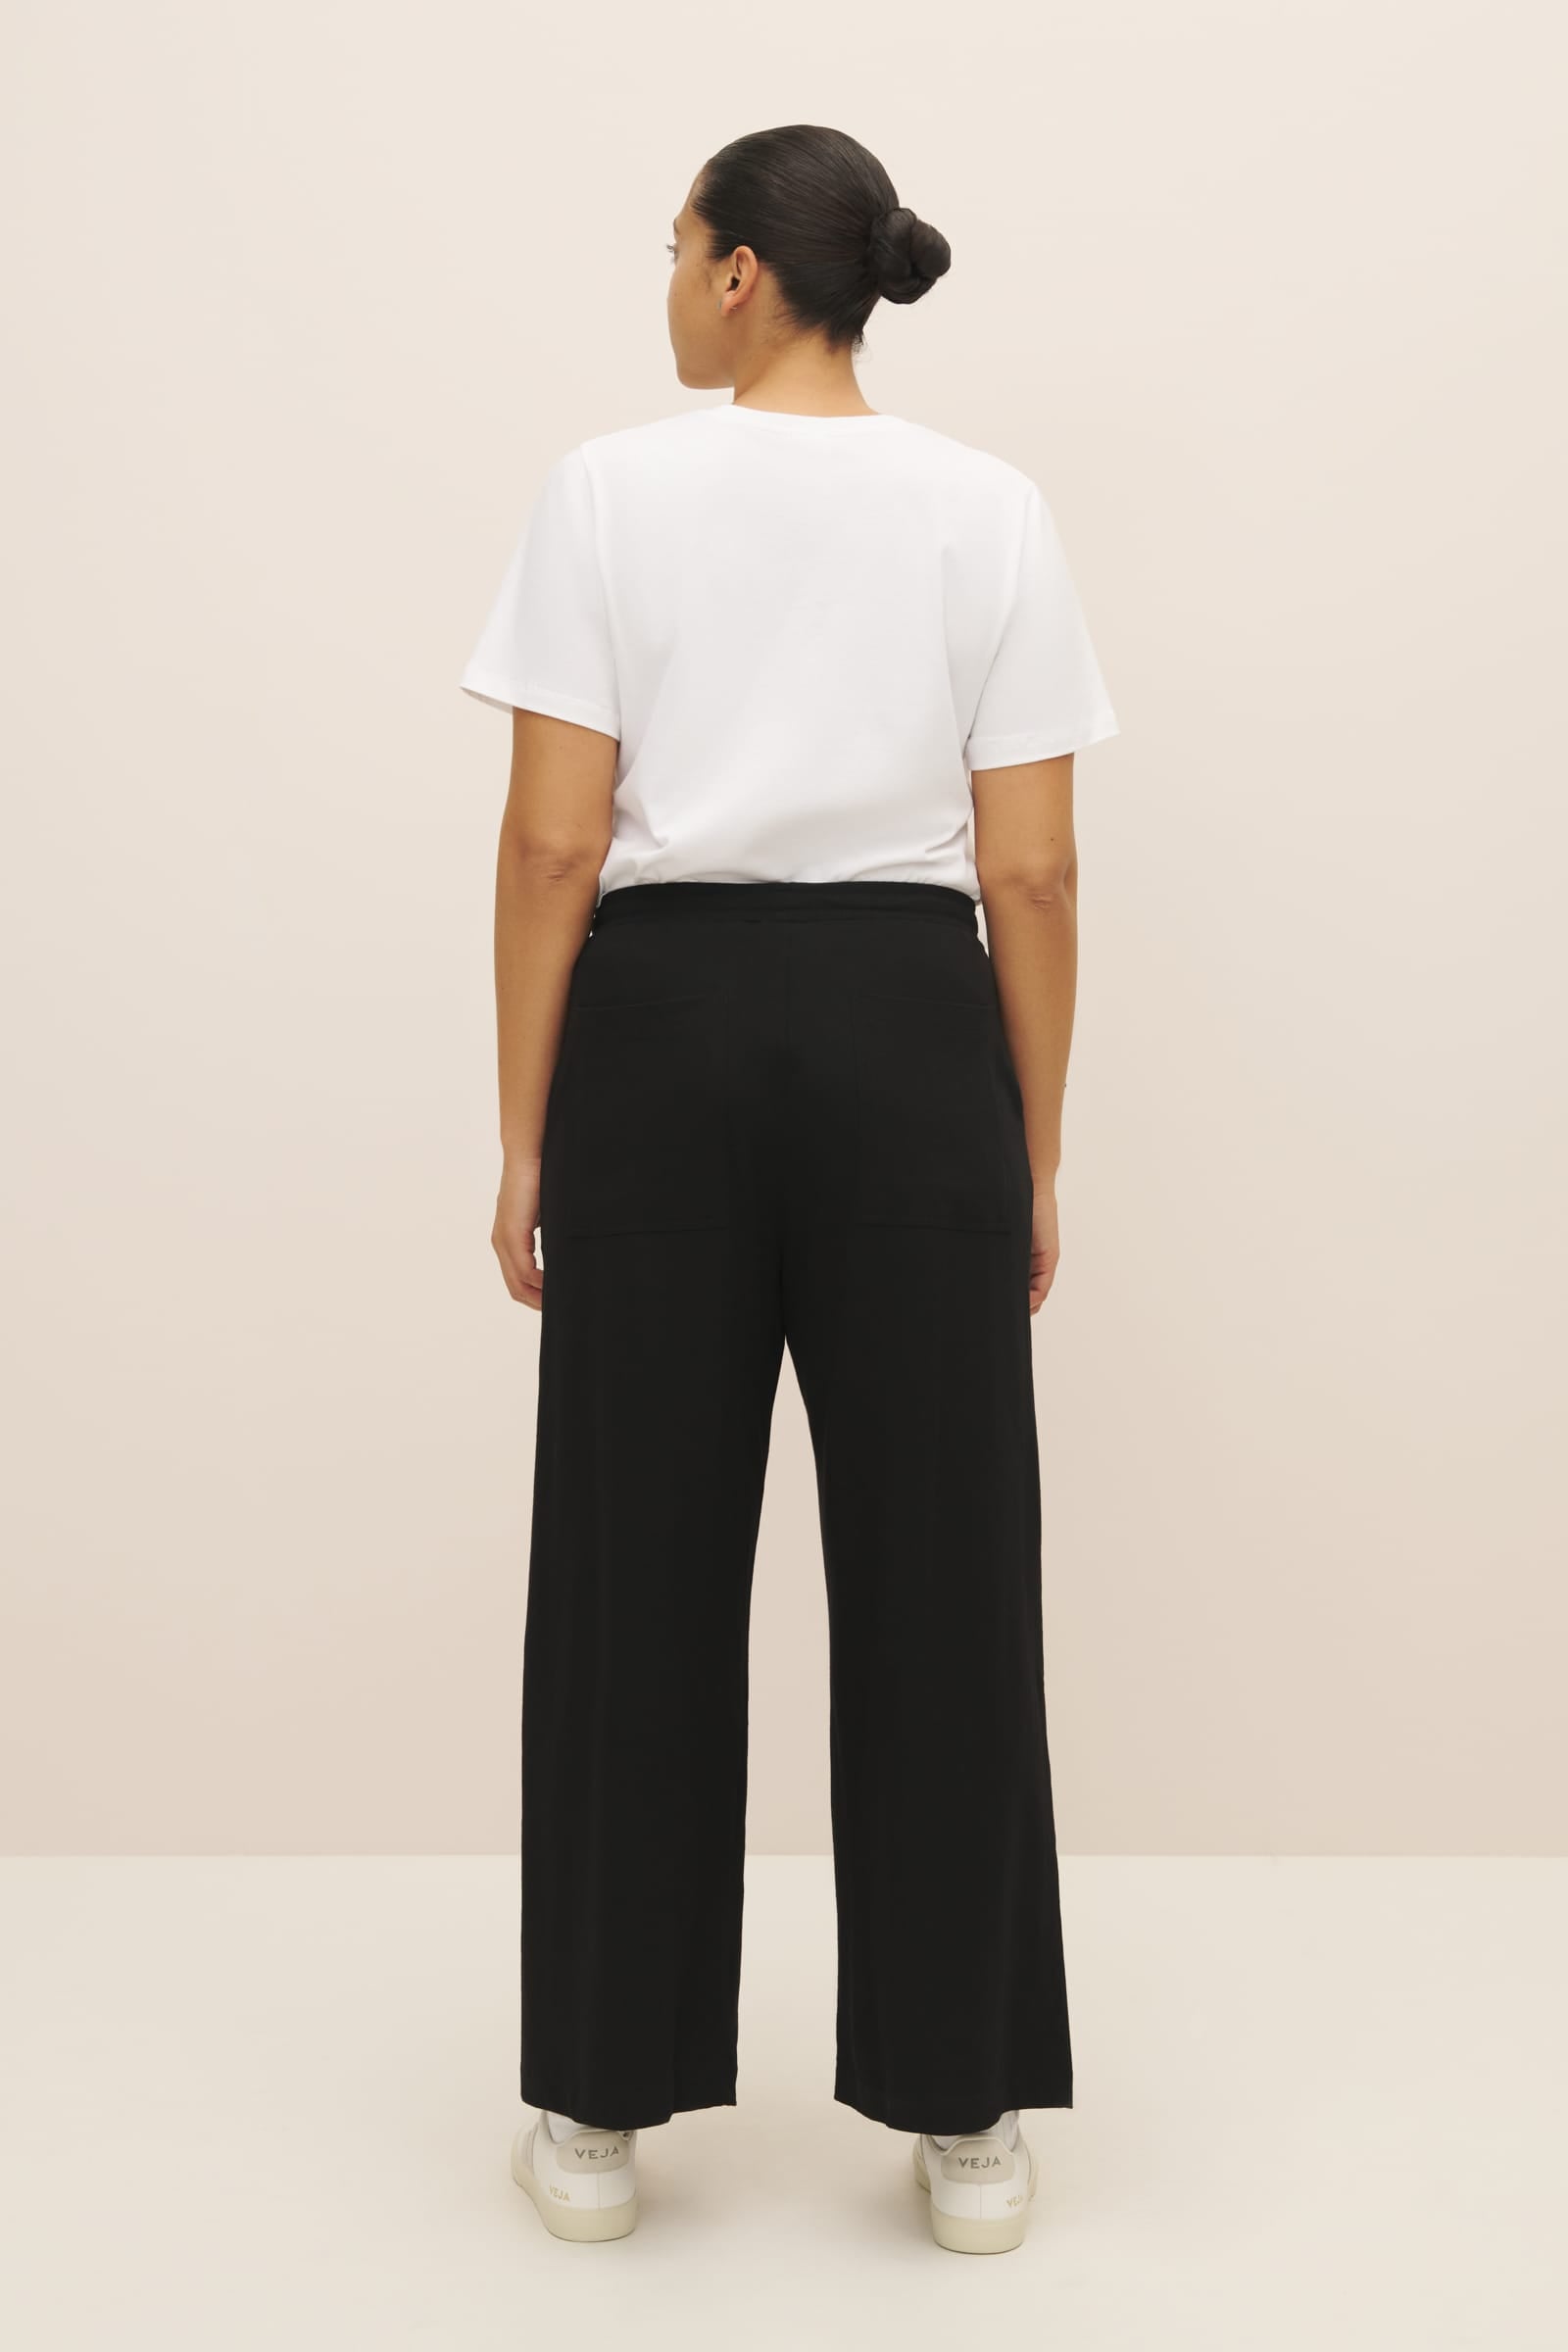 Wide Leg Pant - Black, Relaxed Fit, Elastic Waistband